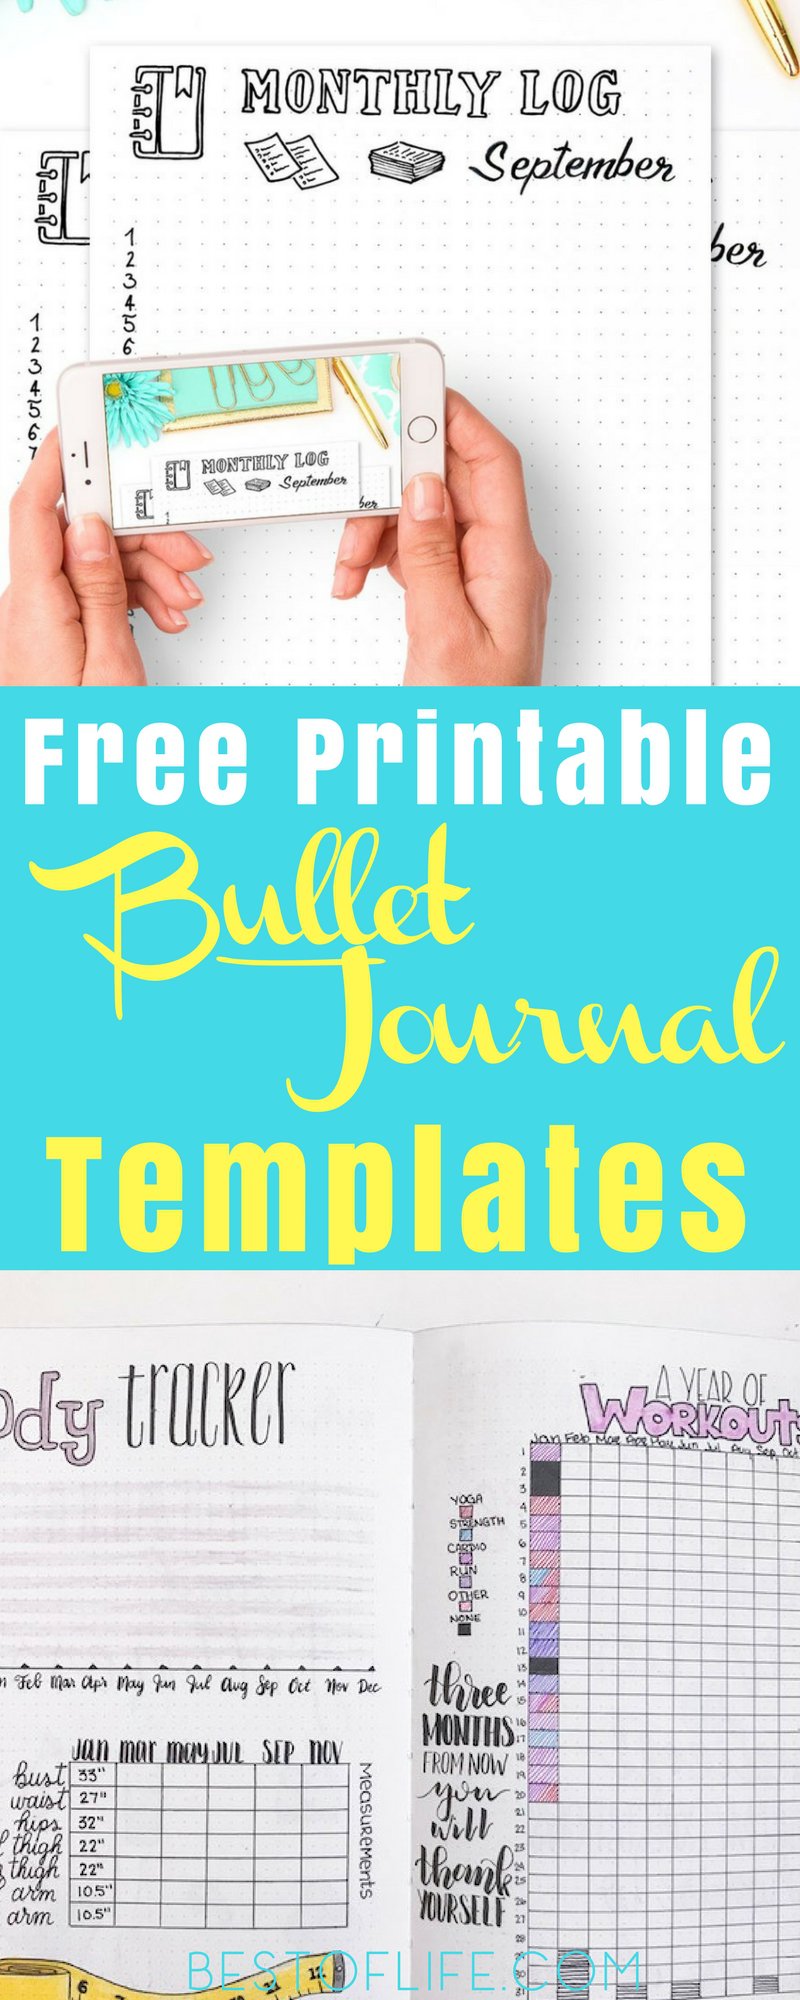 Printable bullet journal templates can help give you the creativity you need to put together the best bullet journal to organize every aspect of your life. Bullet Journal Printables | Free Bullet Journal Printables | BuJo Printables | Bullet Journal Tips | Best BUllet Journal Tips | BuJo Tips | Best BuJo Tips